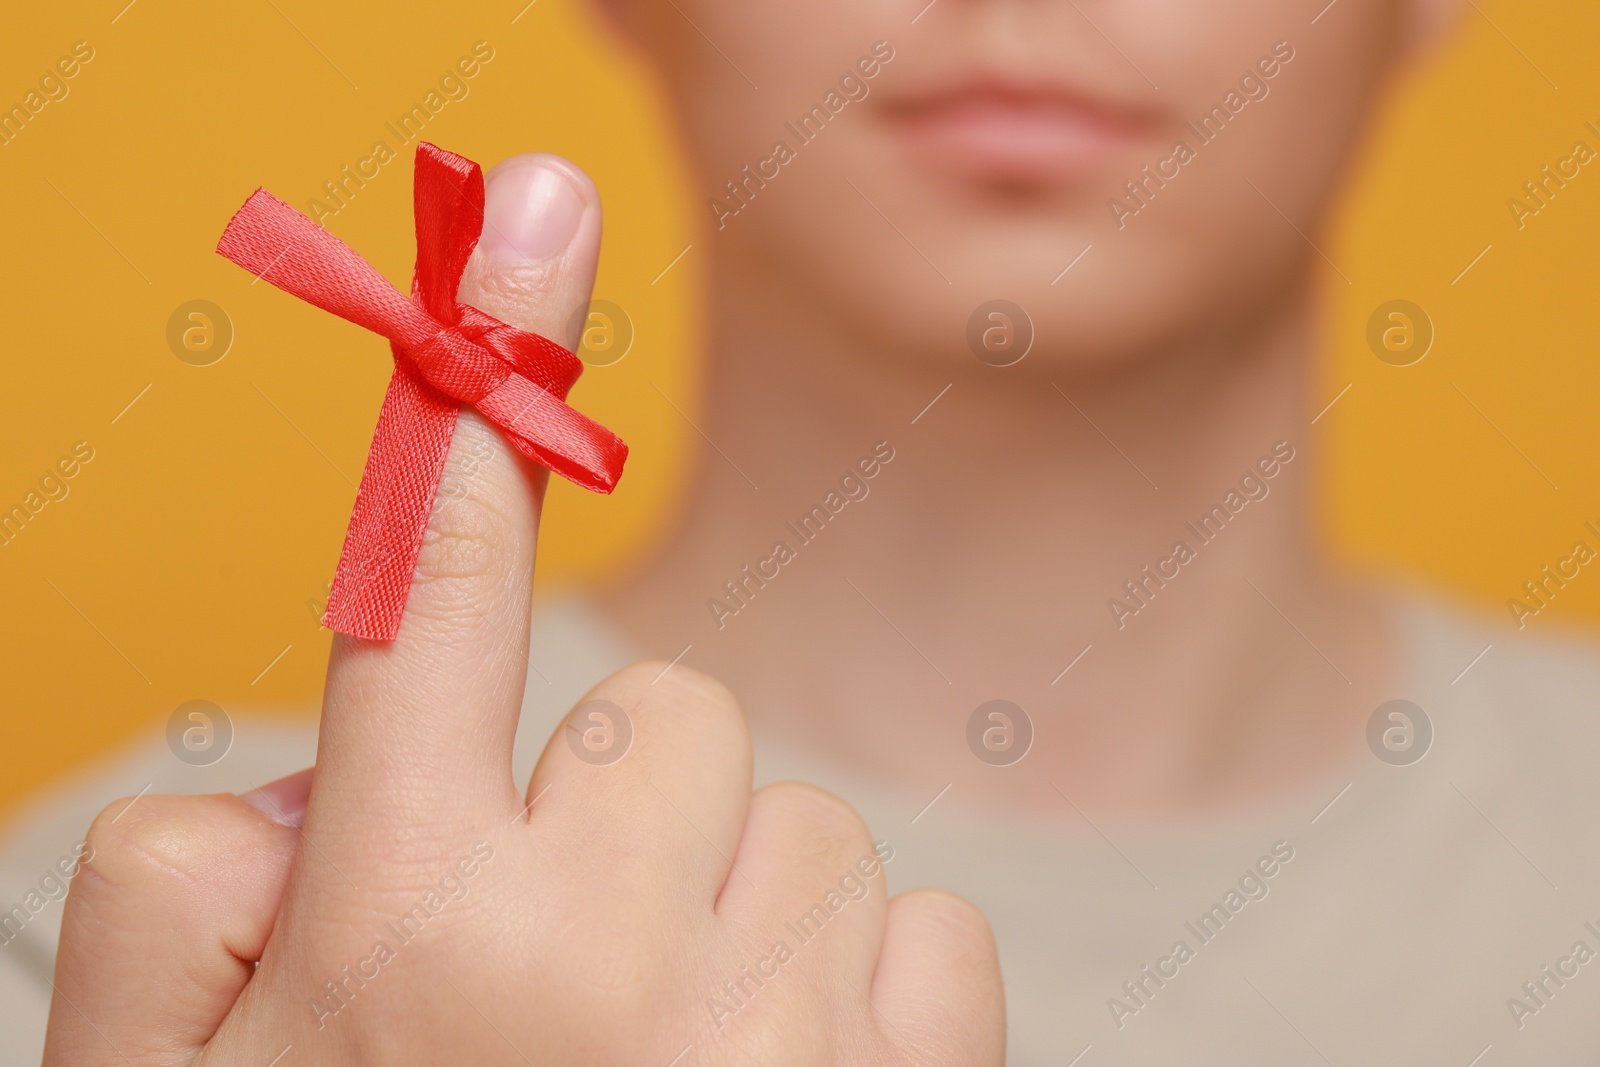 Photo of Man showing index finger with red tied bow as reminder against orange background, focus on hand